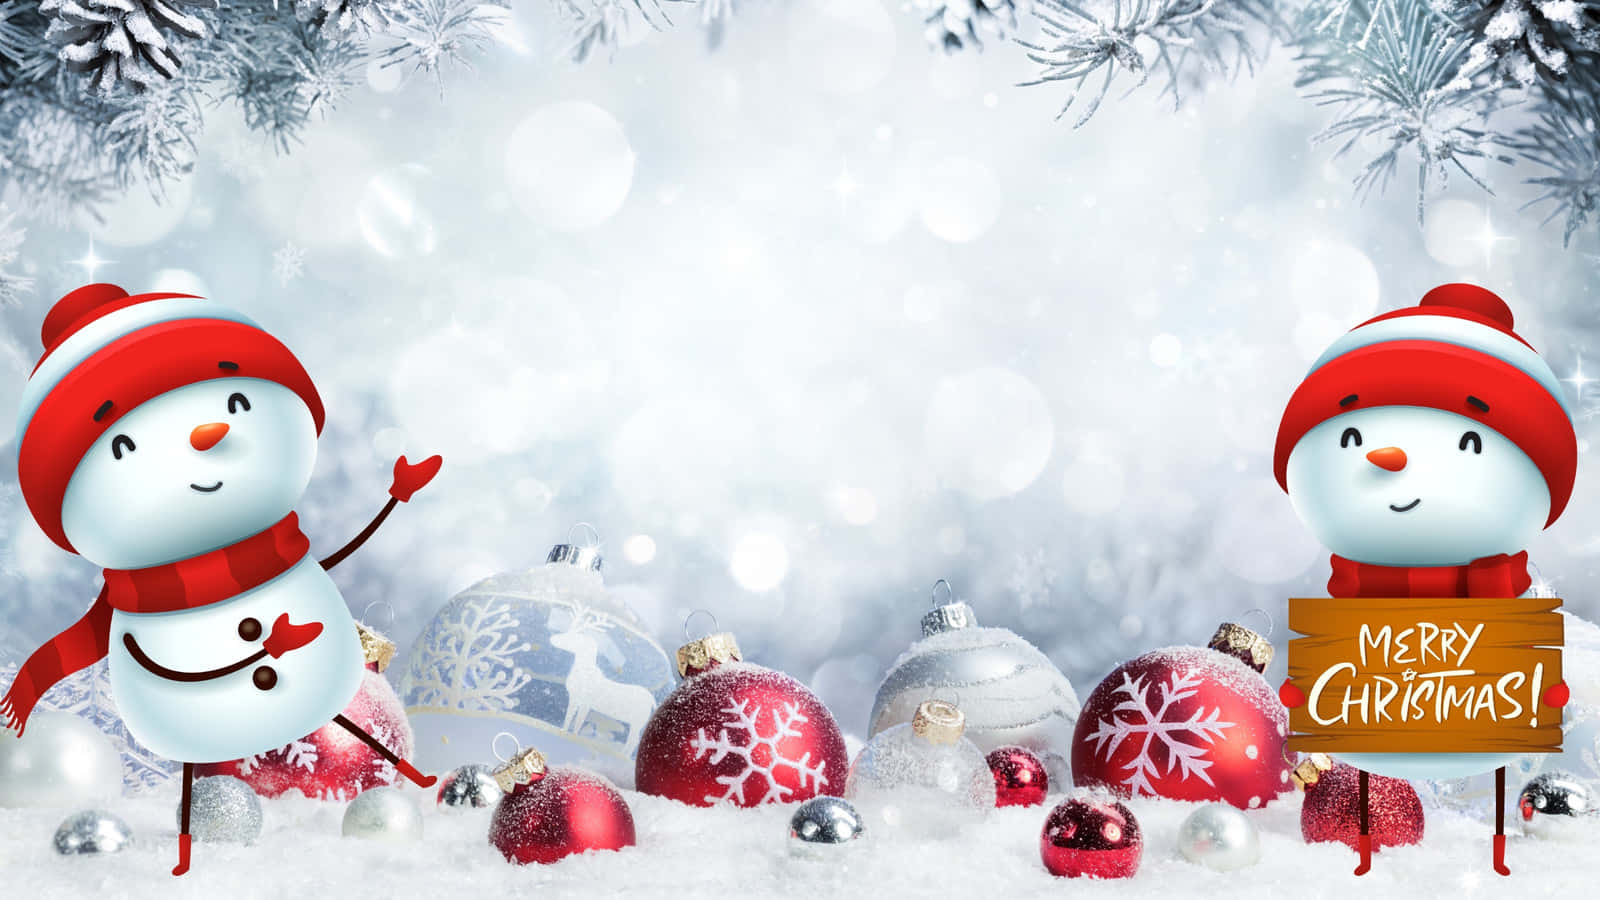 Keep the holiday spirit alive with our virtual Christmas background